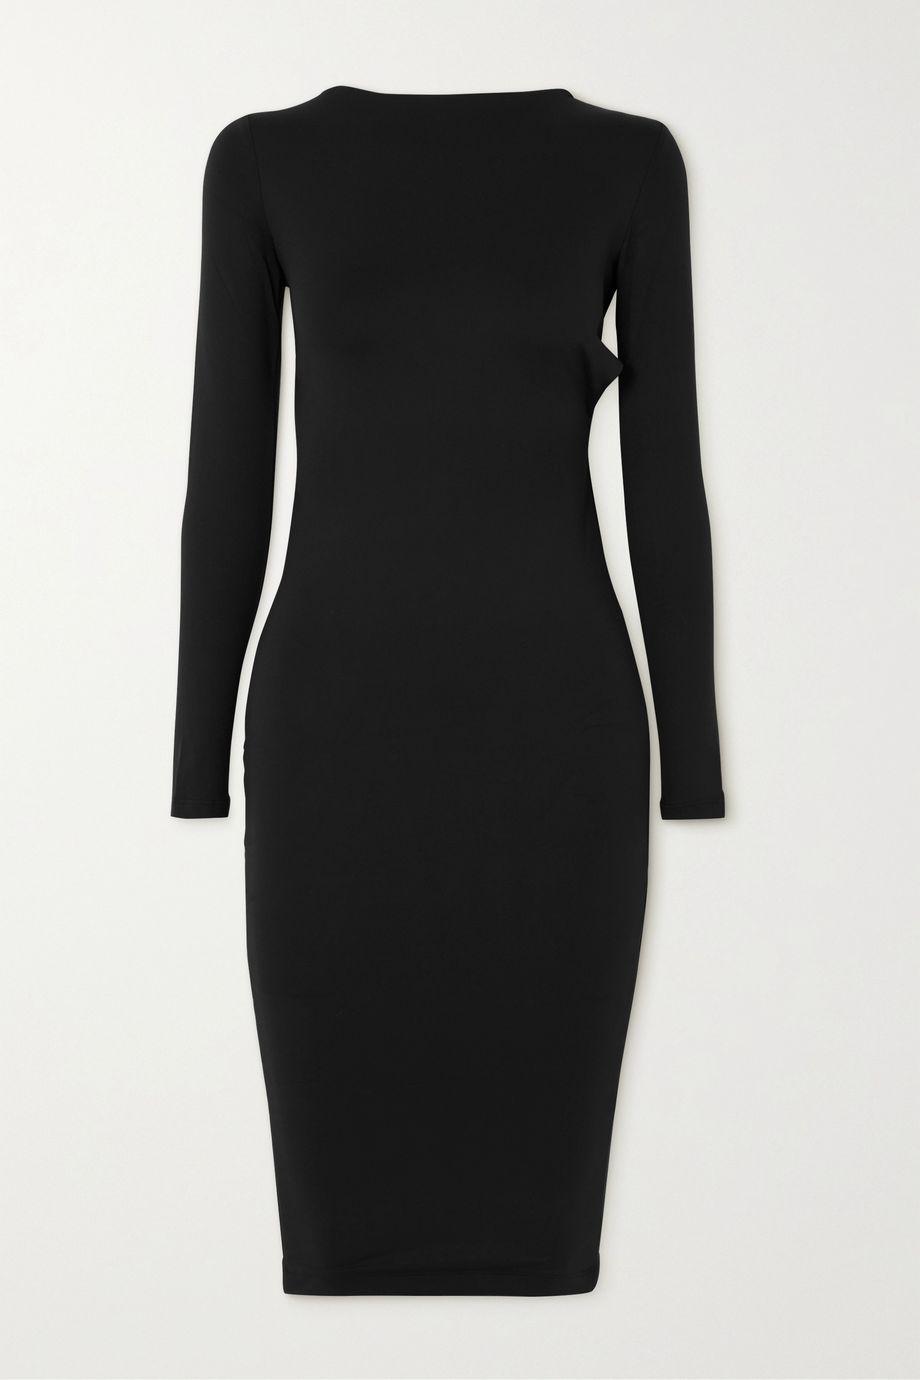 Eden open-back stretch-jersey dress by ALIX NYC